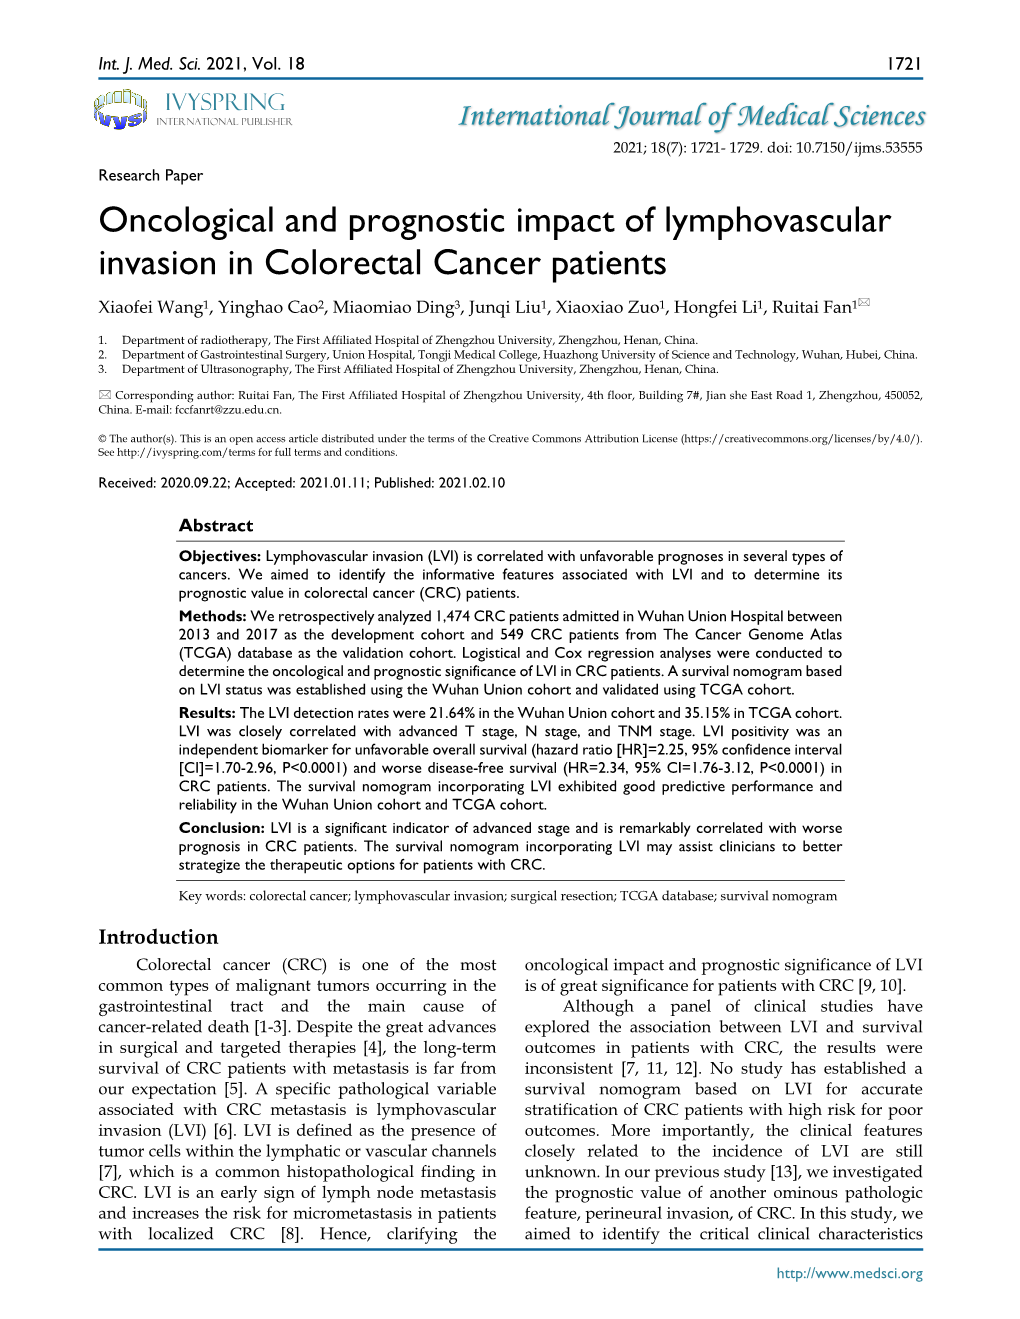 Oncological and Prognostic Impact of Lymphovascular Invasion In